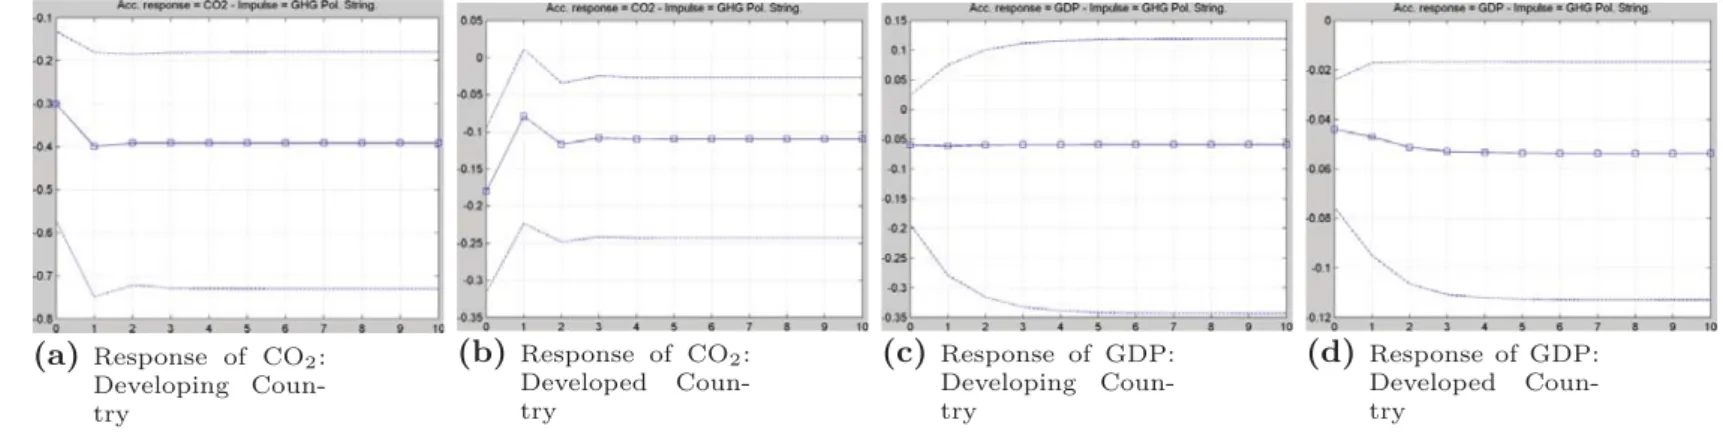 Figure 2: IRFs for a GHG Policy Stringency Shock, Developed vs. developing Coun- Coun-tries, 10% Conﬁdence Interval